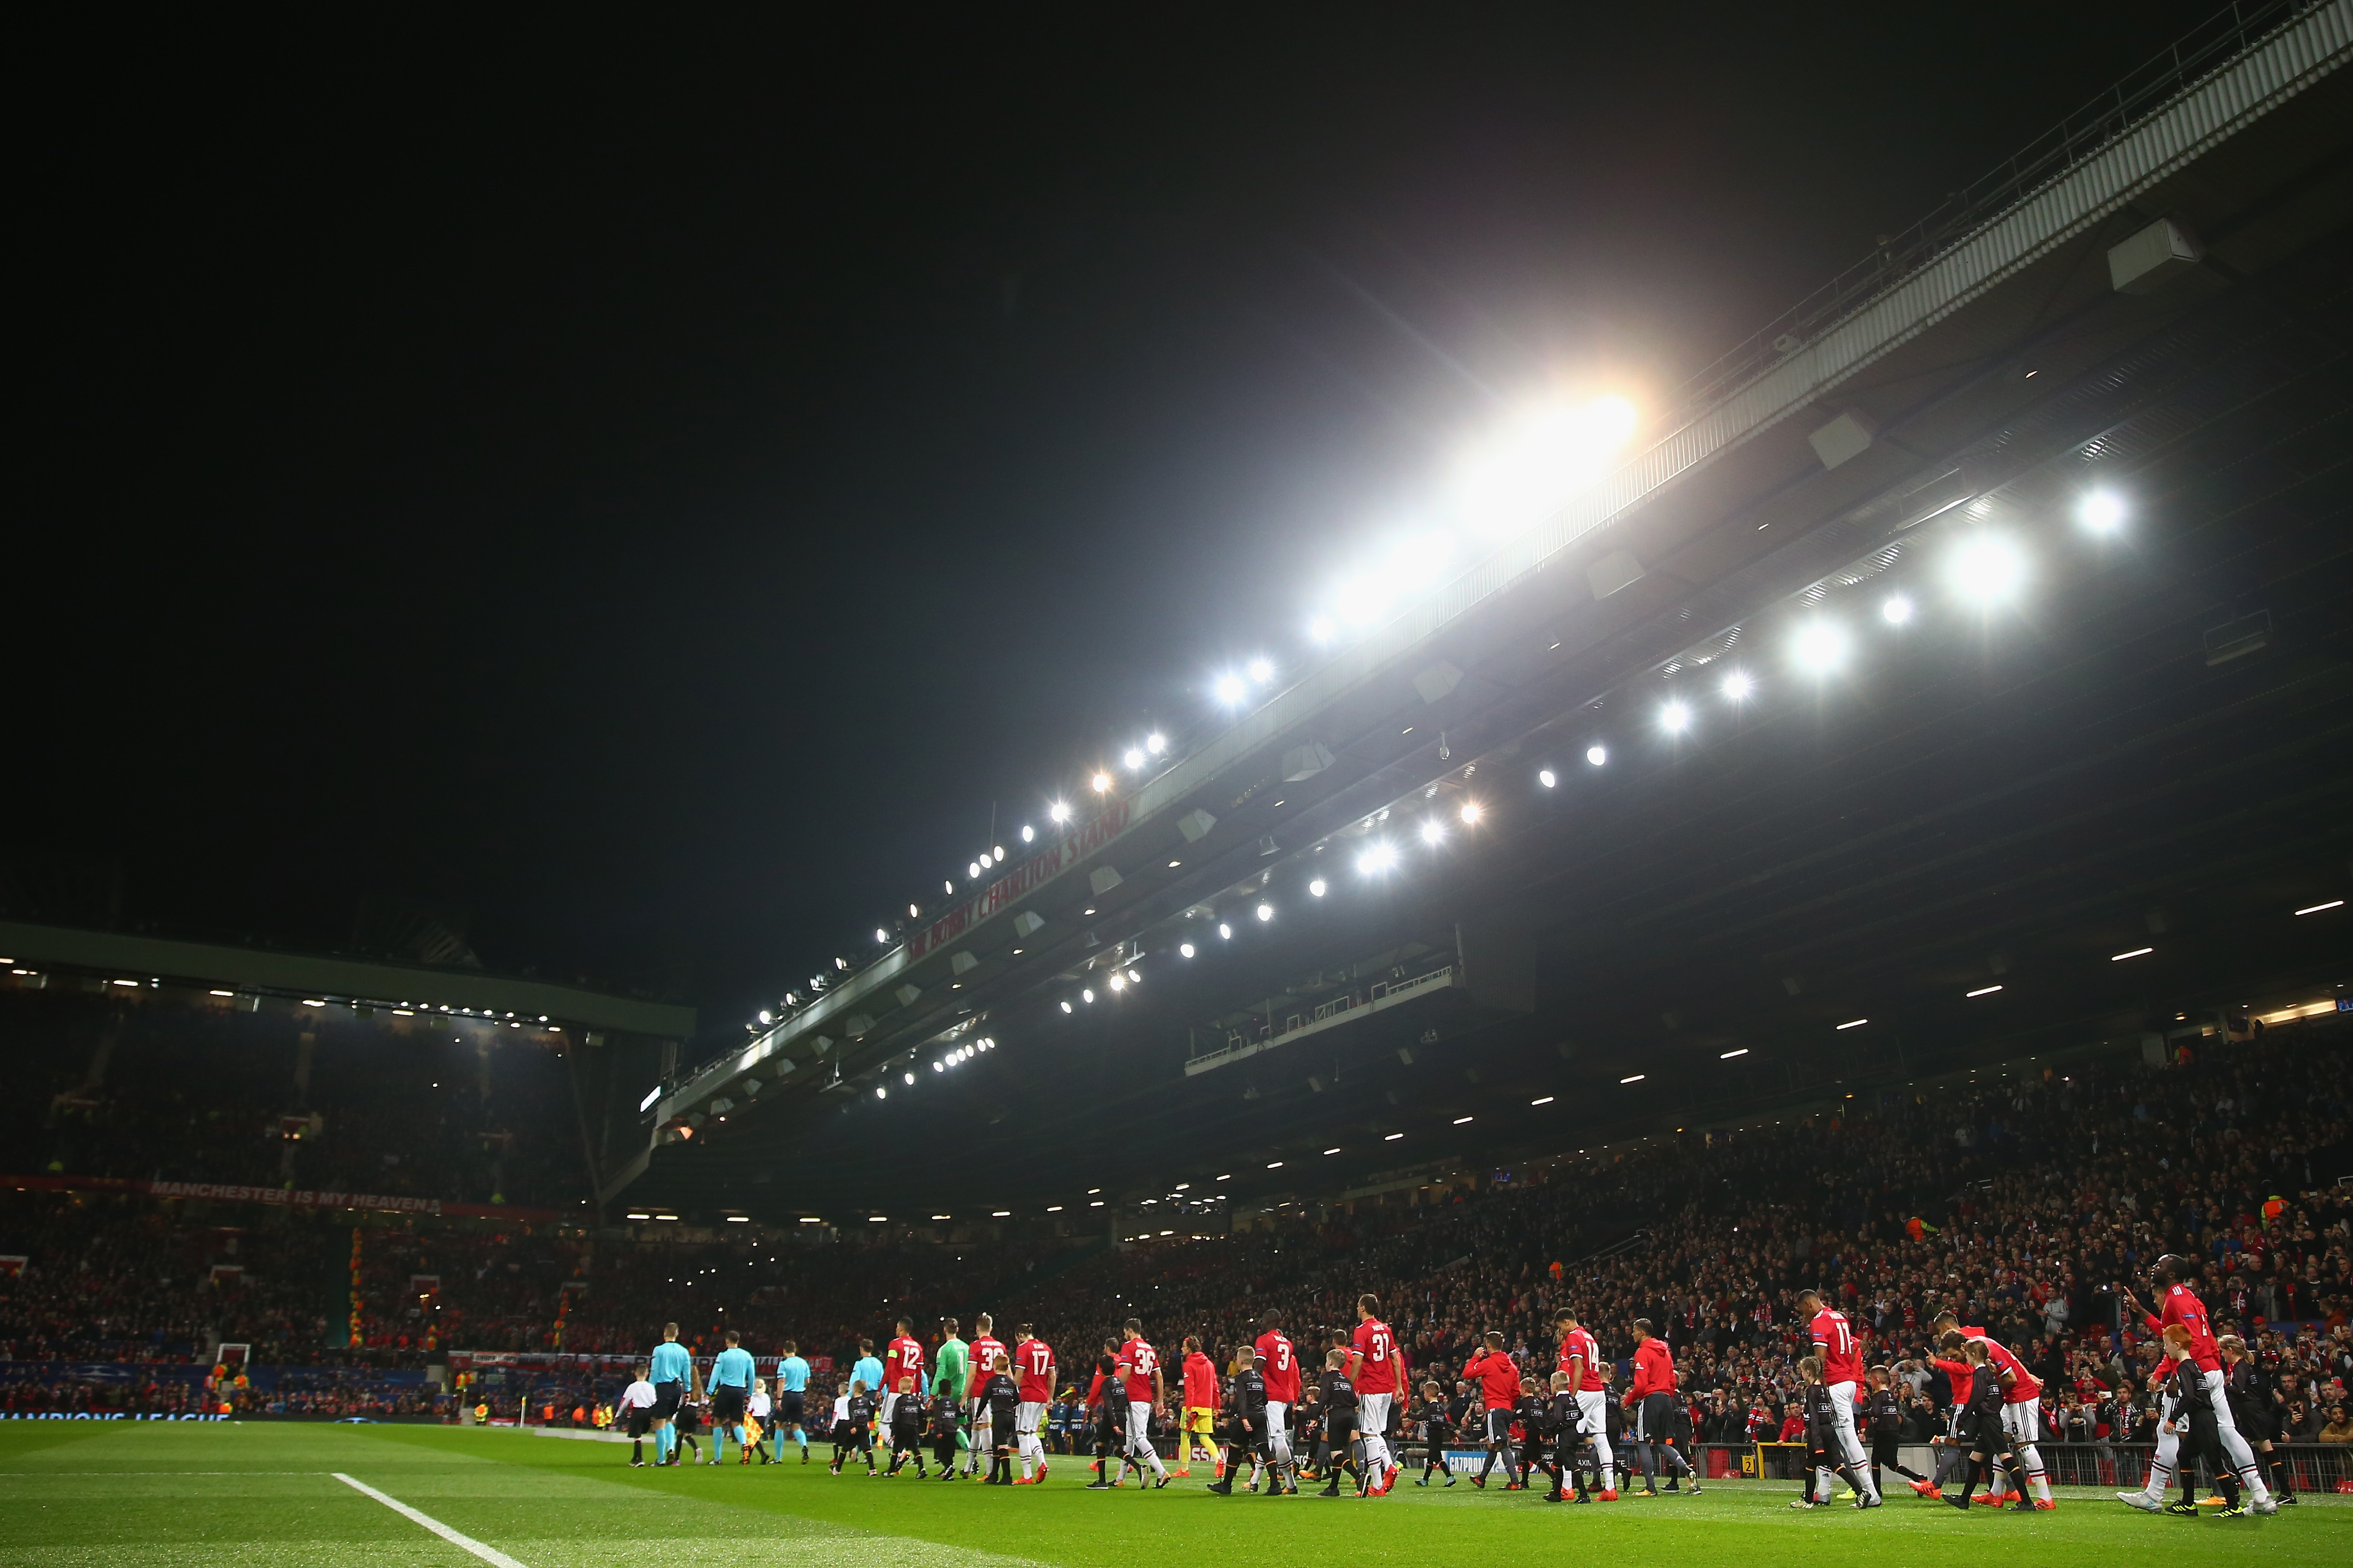 MANCHESTER, ENGLAND - OCTOBER 31: The players of Manchester United and Benfica walk onto the pitch ahead of the UEFA Champions League group A match between Manchester United and SL Benfica at Old Trafford on October 31, 2017 in Manchester, United Kingdom.  (Photo by Michael Steele/Getty Images)